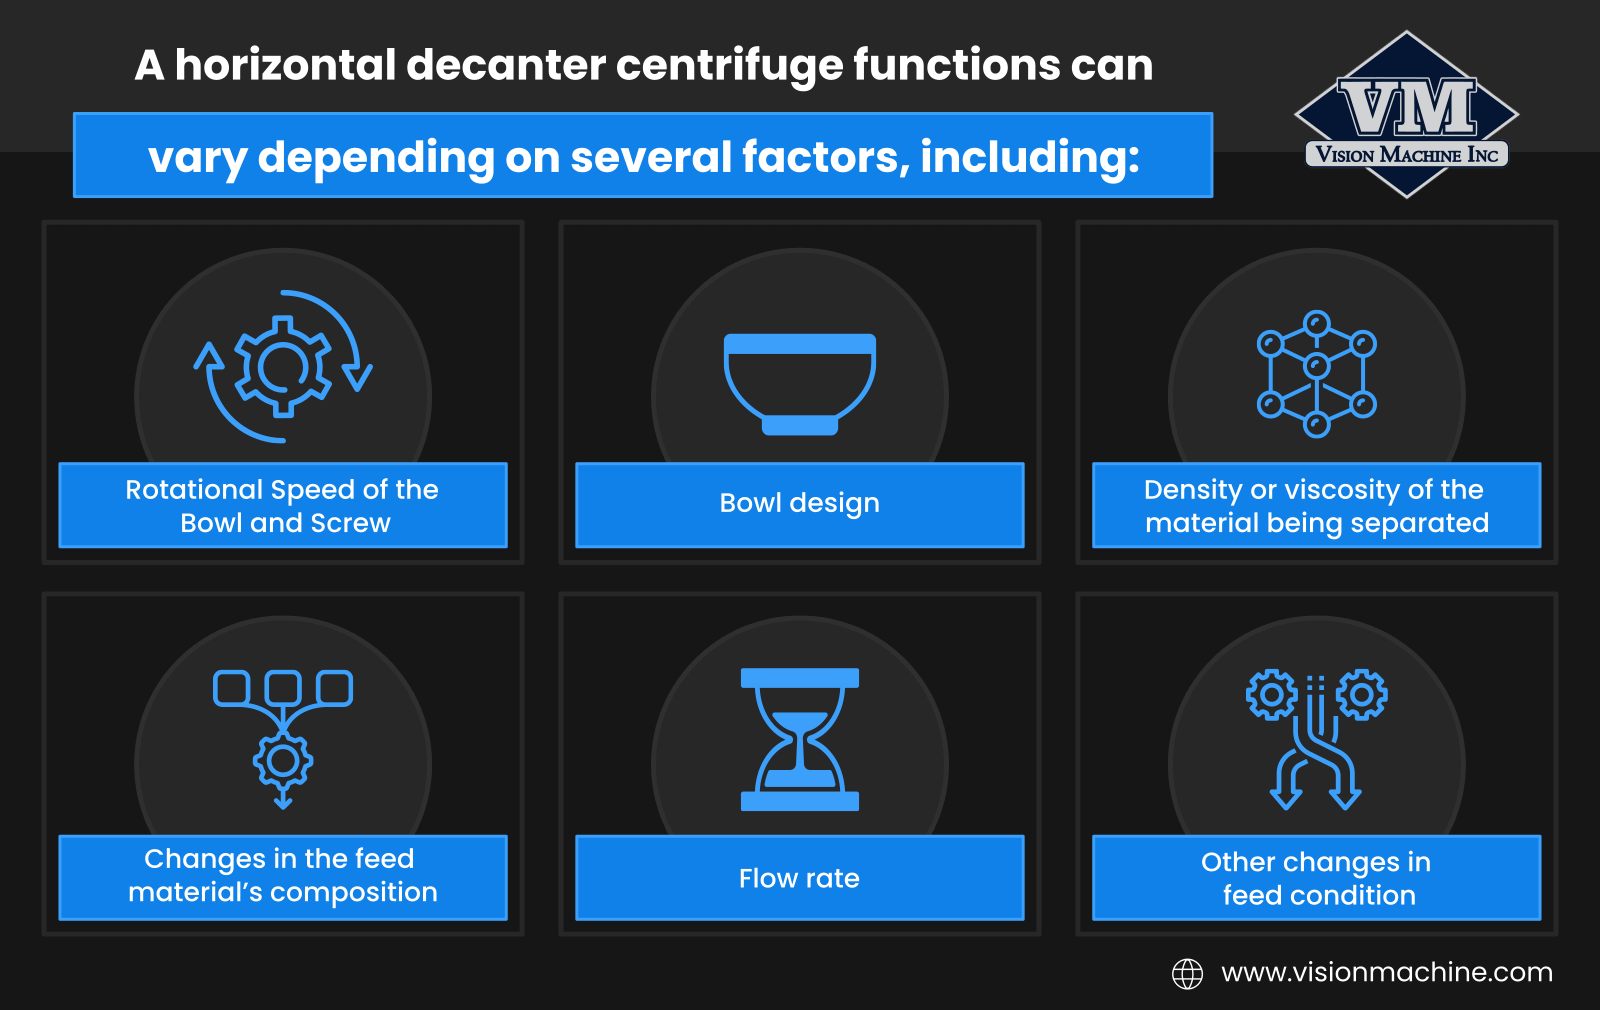 A horizontal decanter centrifuge functions can vary depending on several factors